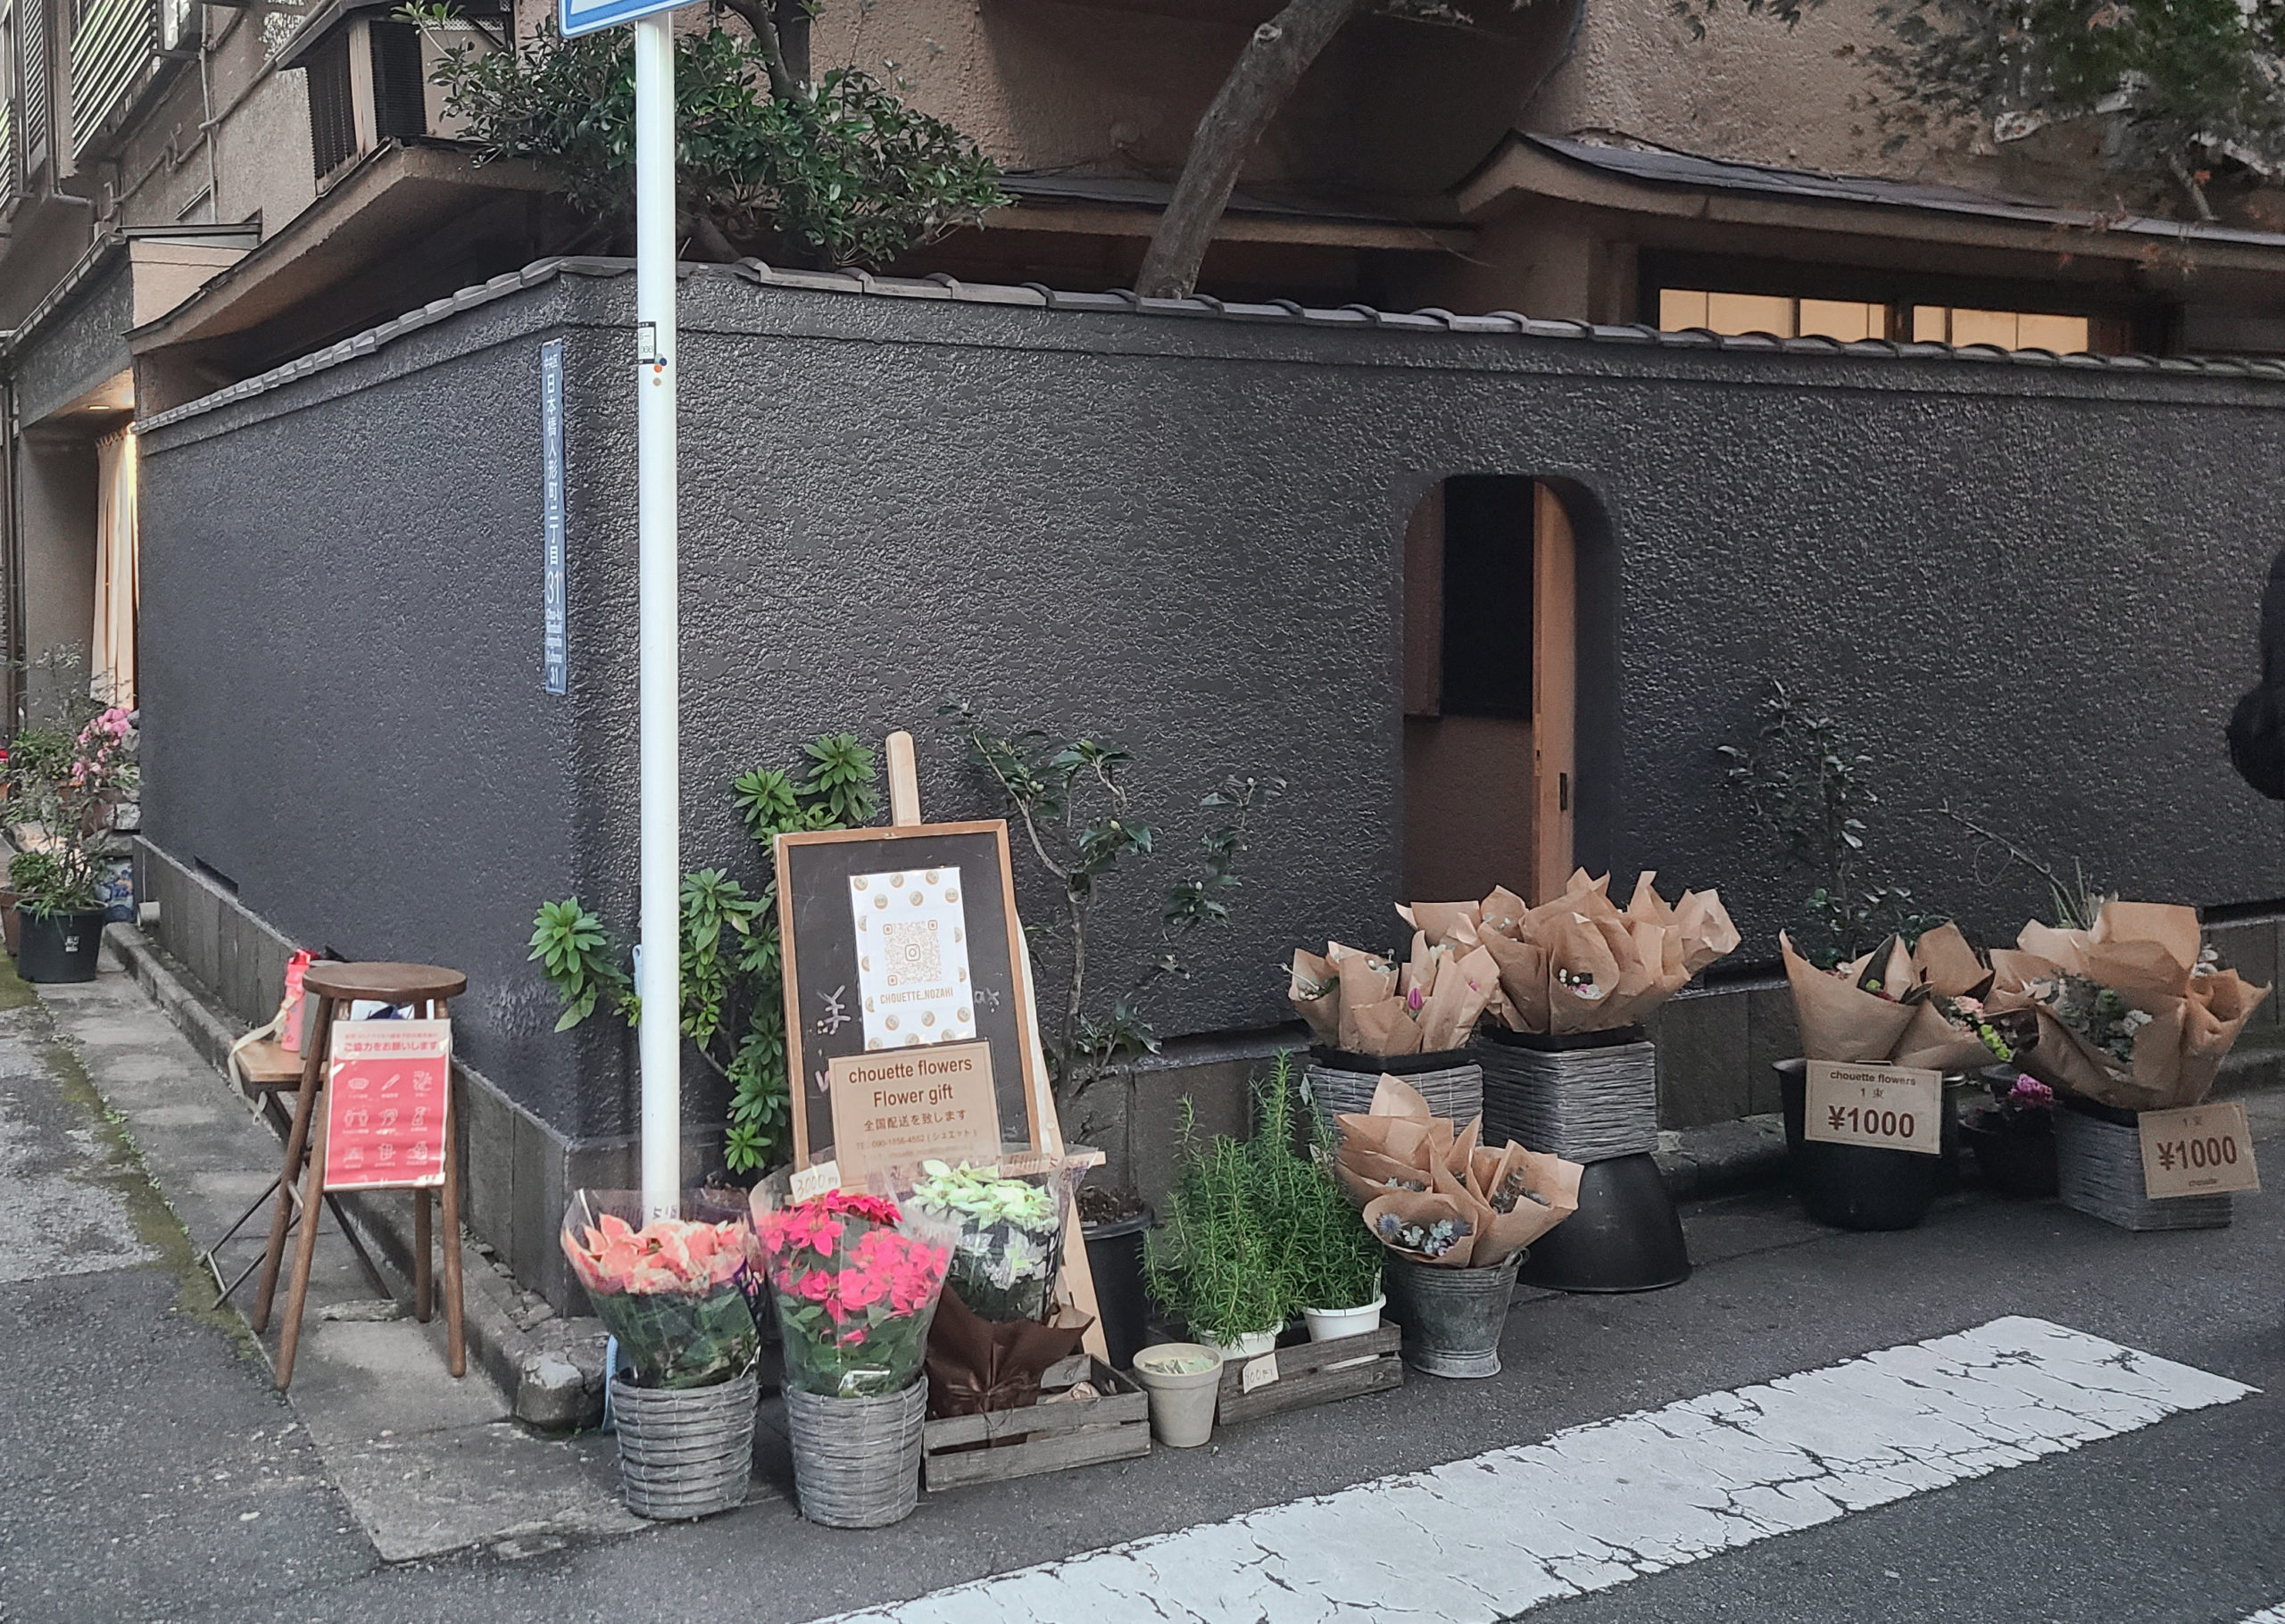 Flowers for sale right outside the ryokan